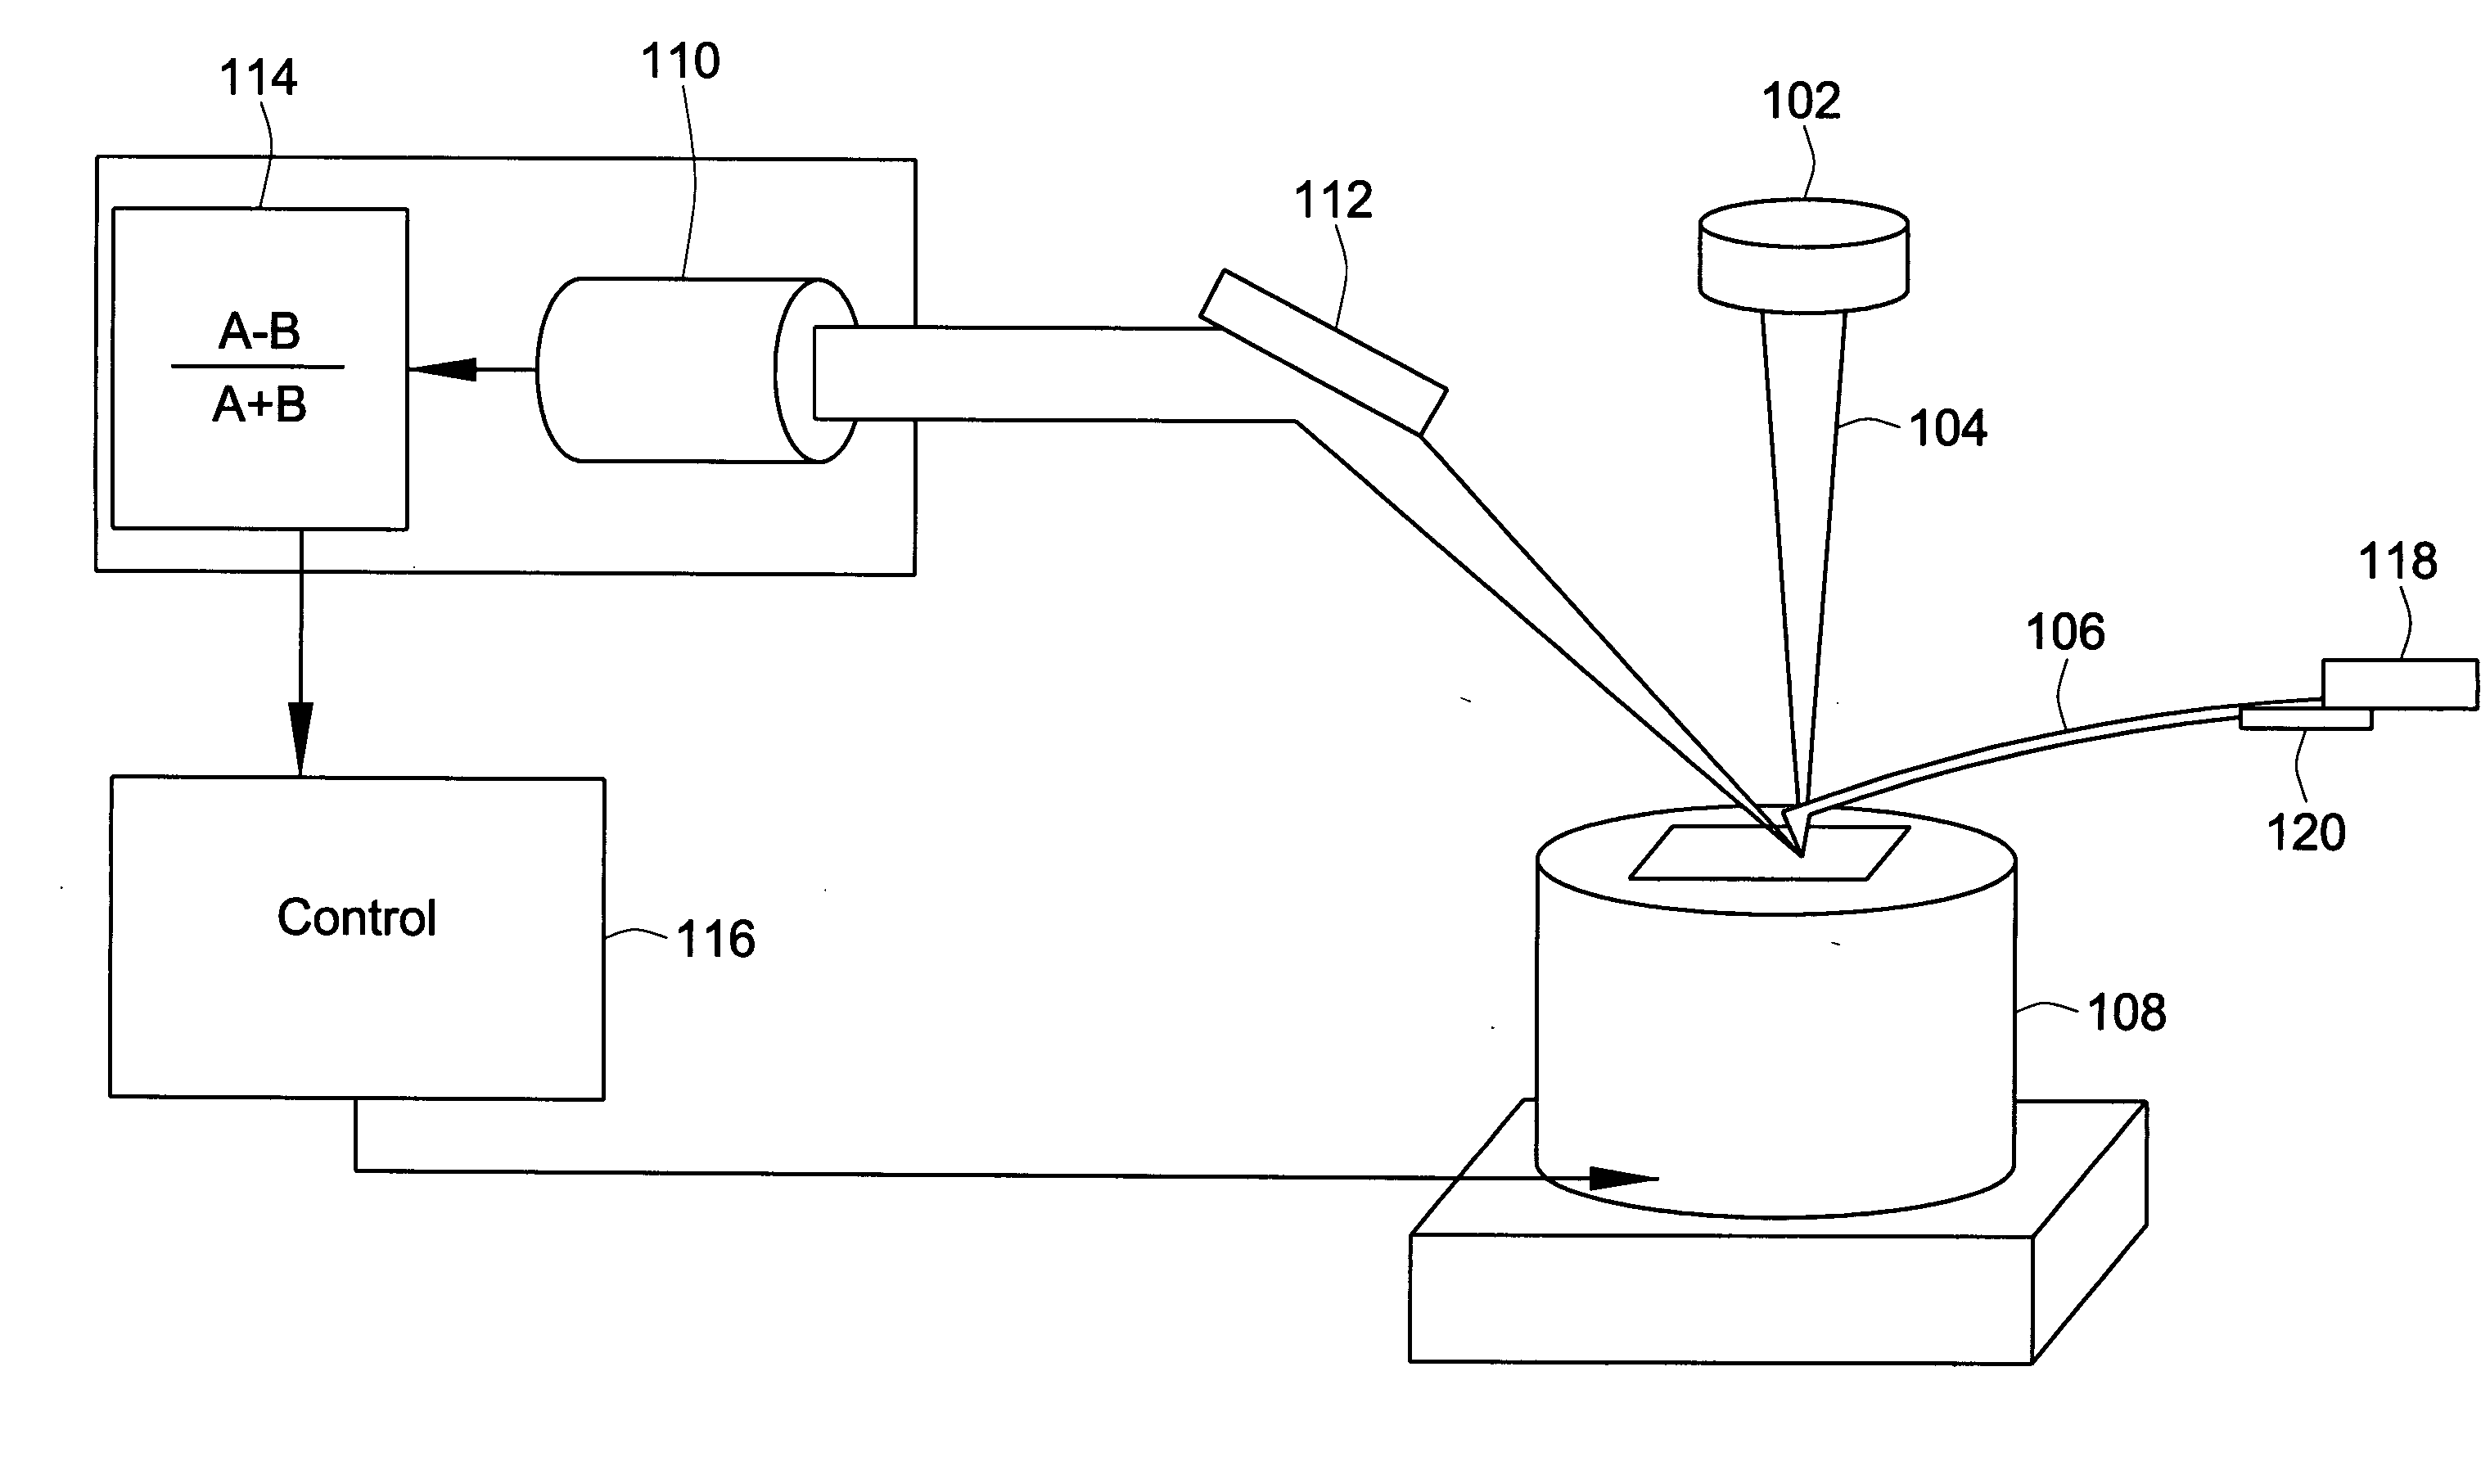 Method to transiently detect samples in atomic force microscopes